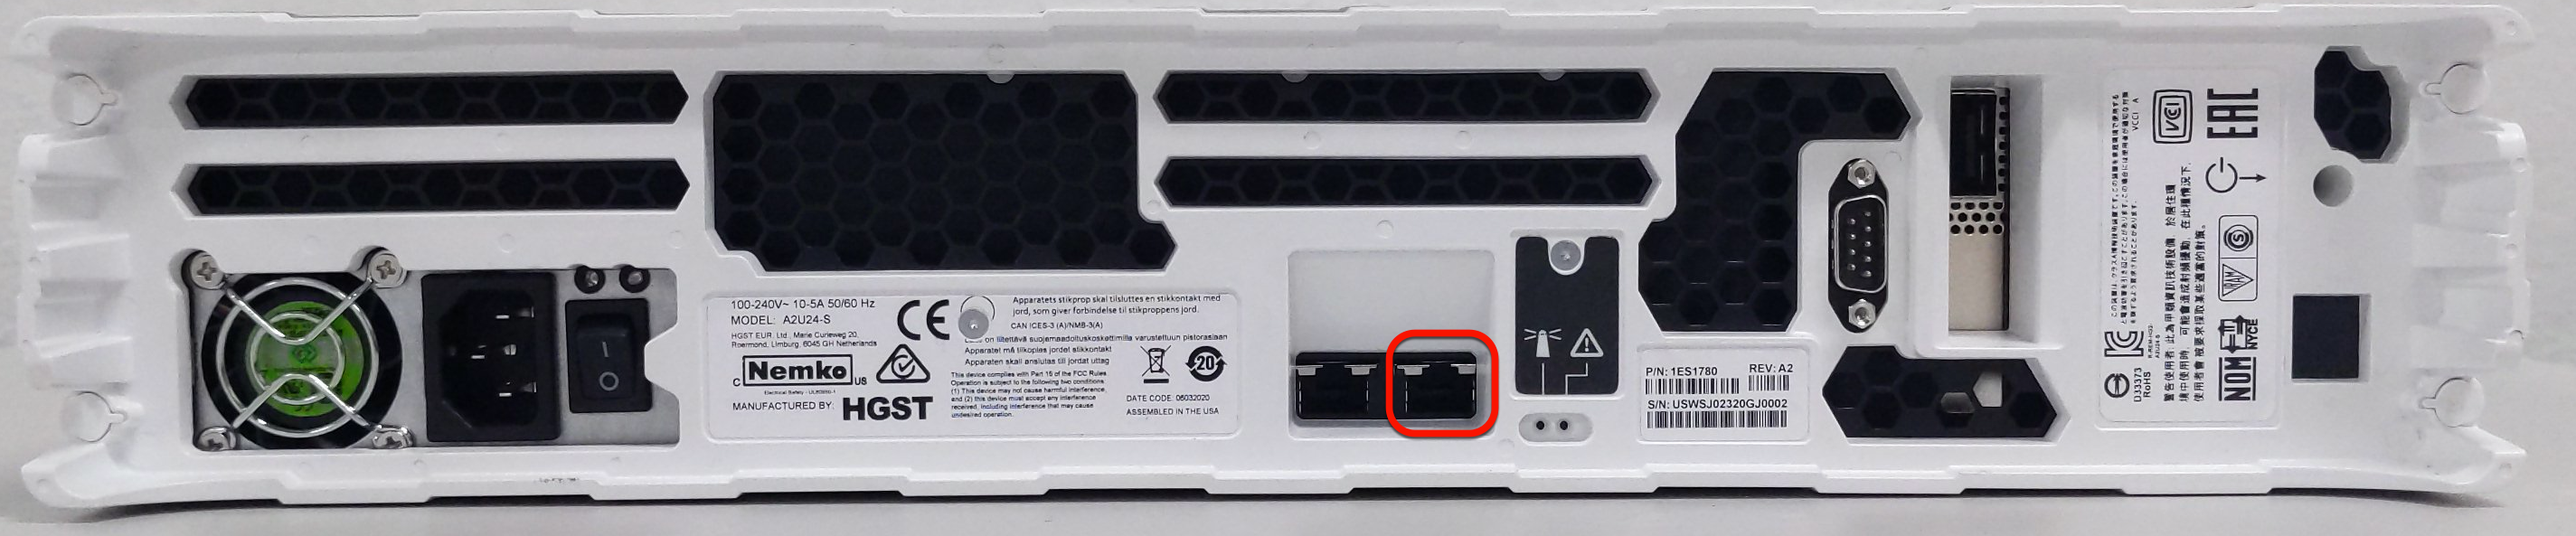 Network port highlighted on the appliance.